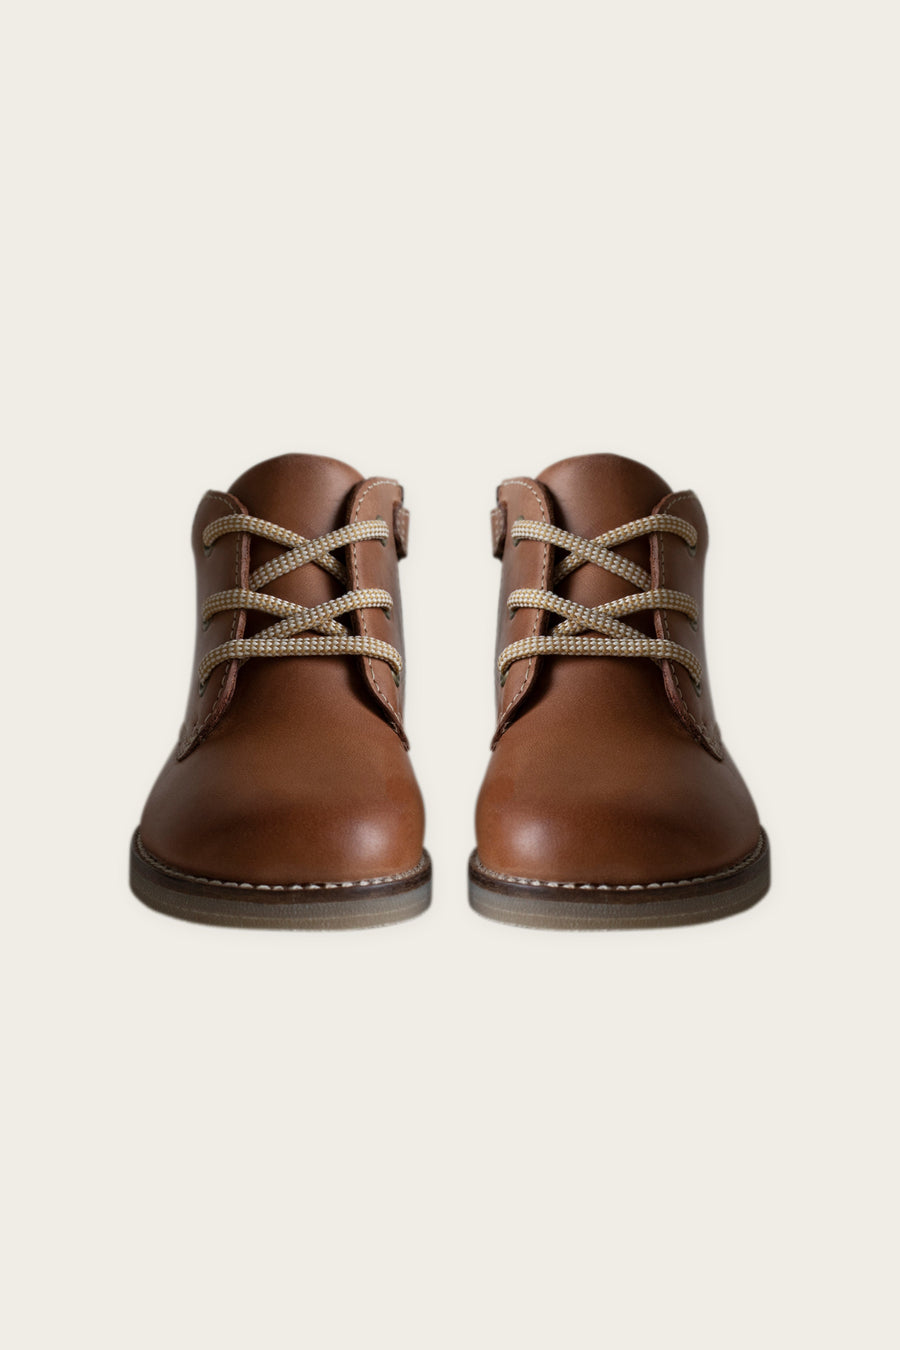 Leather Boot - Tan Childrens Footwear from Jamie Kay USA